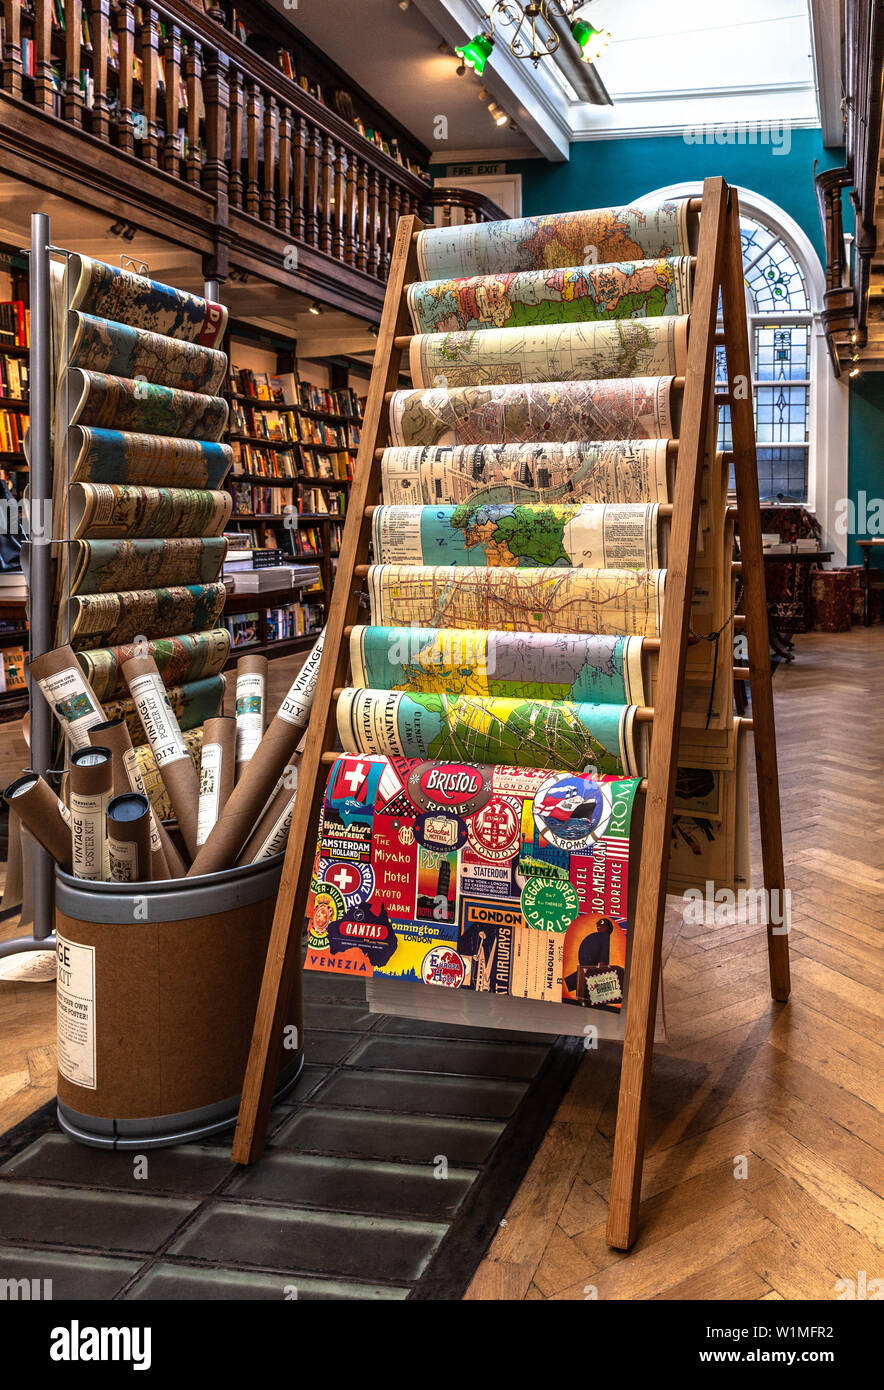 Vertical display stand with maps and wrapping papers, Daunt Books, Marylebone High Street, London W1U, England, UK. Stock Photo